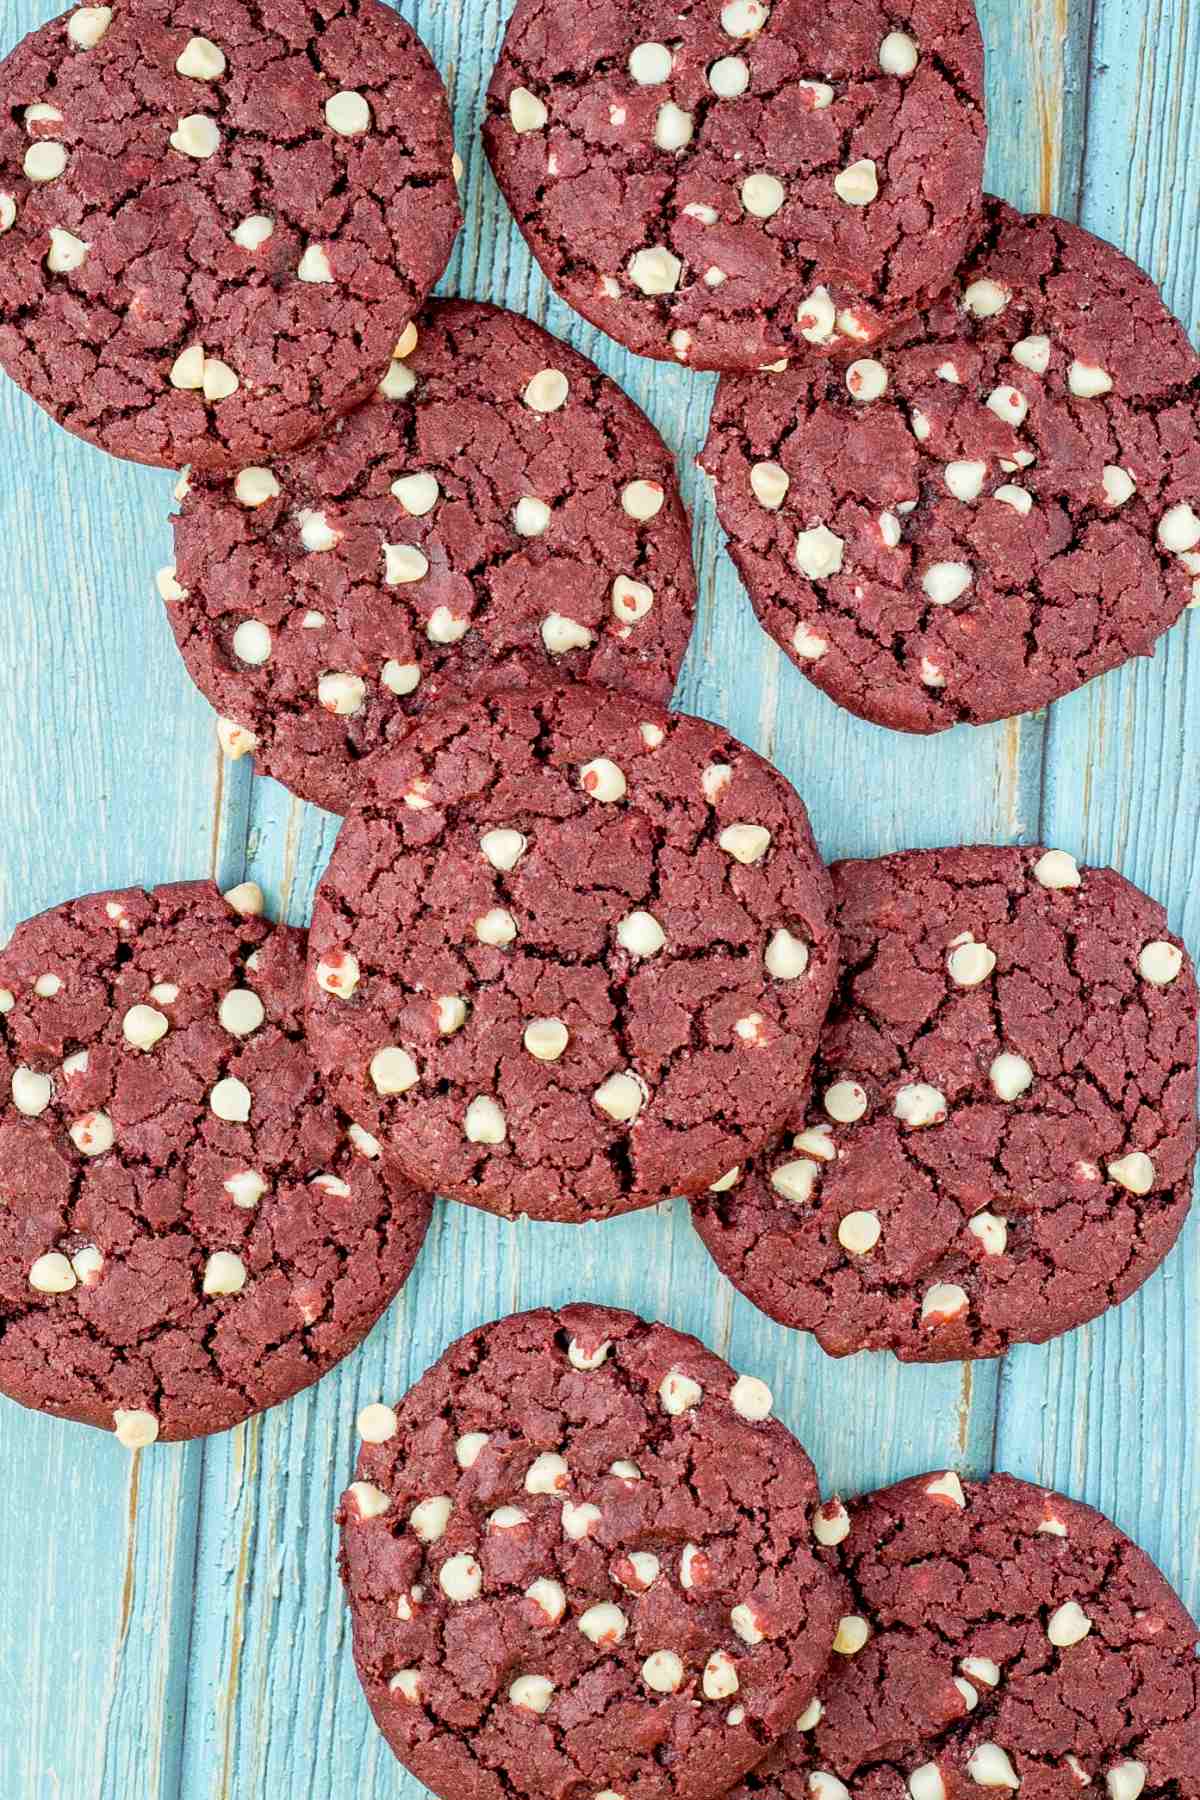 Lot of red velvet cookies with white chocolate chips on a light blue wooden surface. 